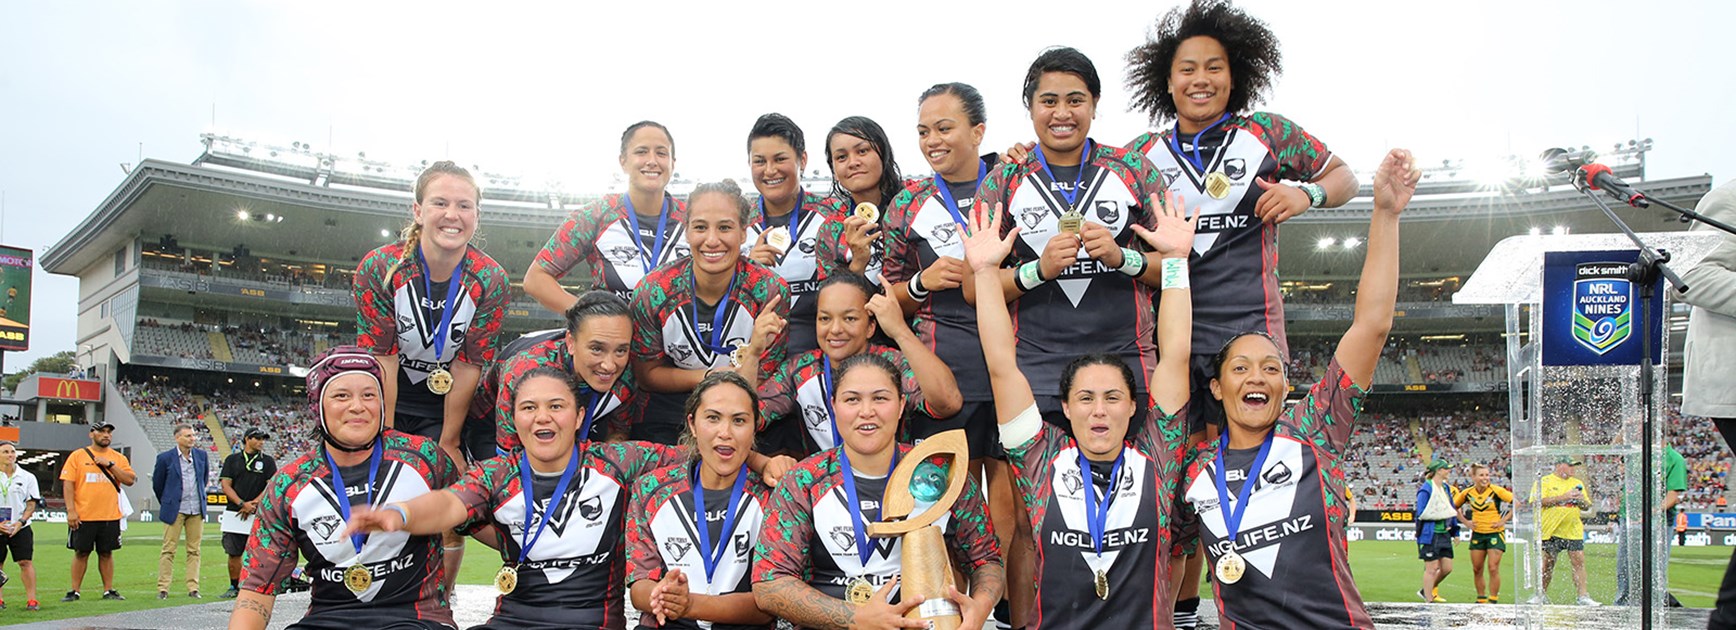 The Kiwi Ferns celebrate their series win over the Jillaroos at the 2015 Auckland Nines.